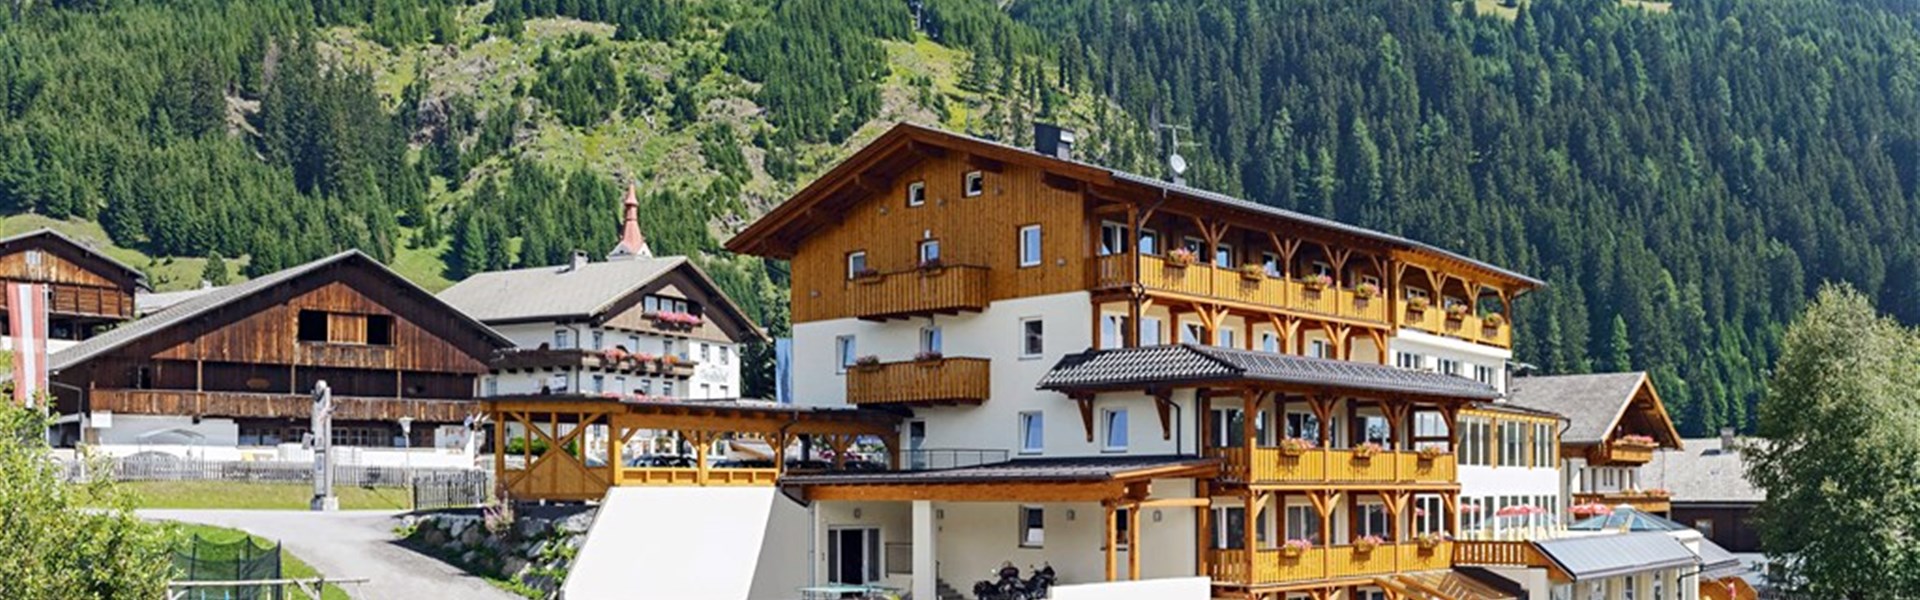 Marco Polo - Hotel Gasthof Andreas (S) - 